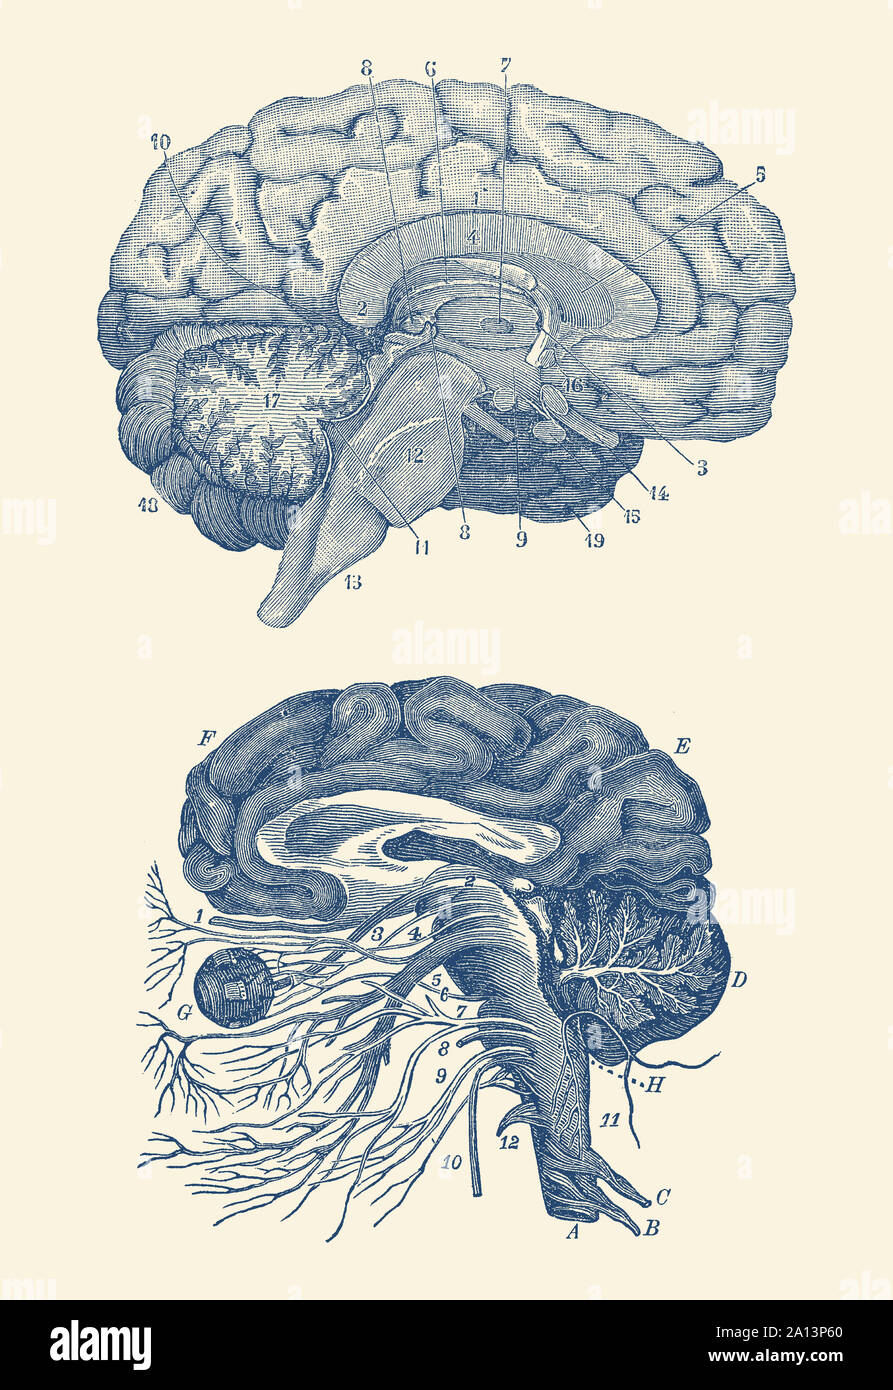 Diagram of the arteries of the brain and the circulatory system surrounding the brain. Stock Photo